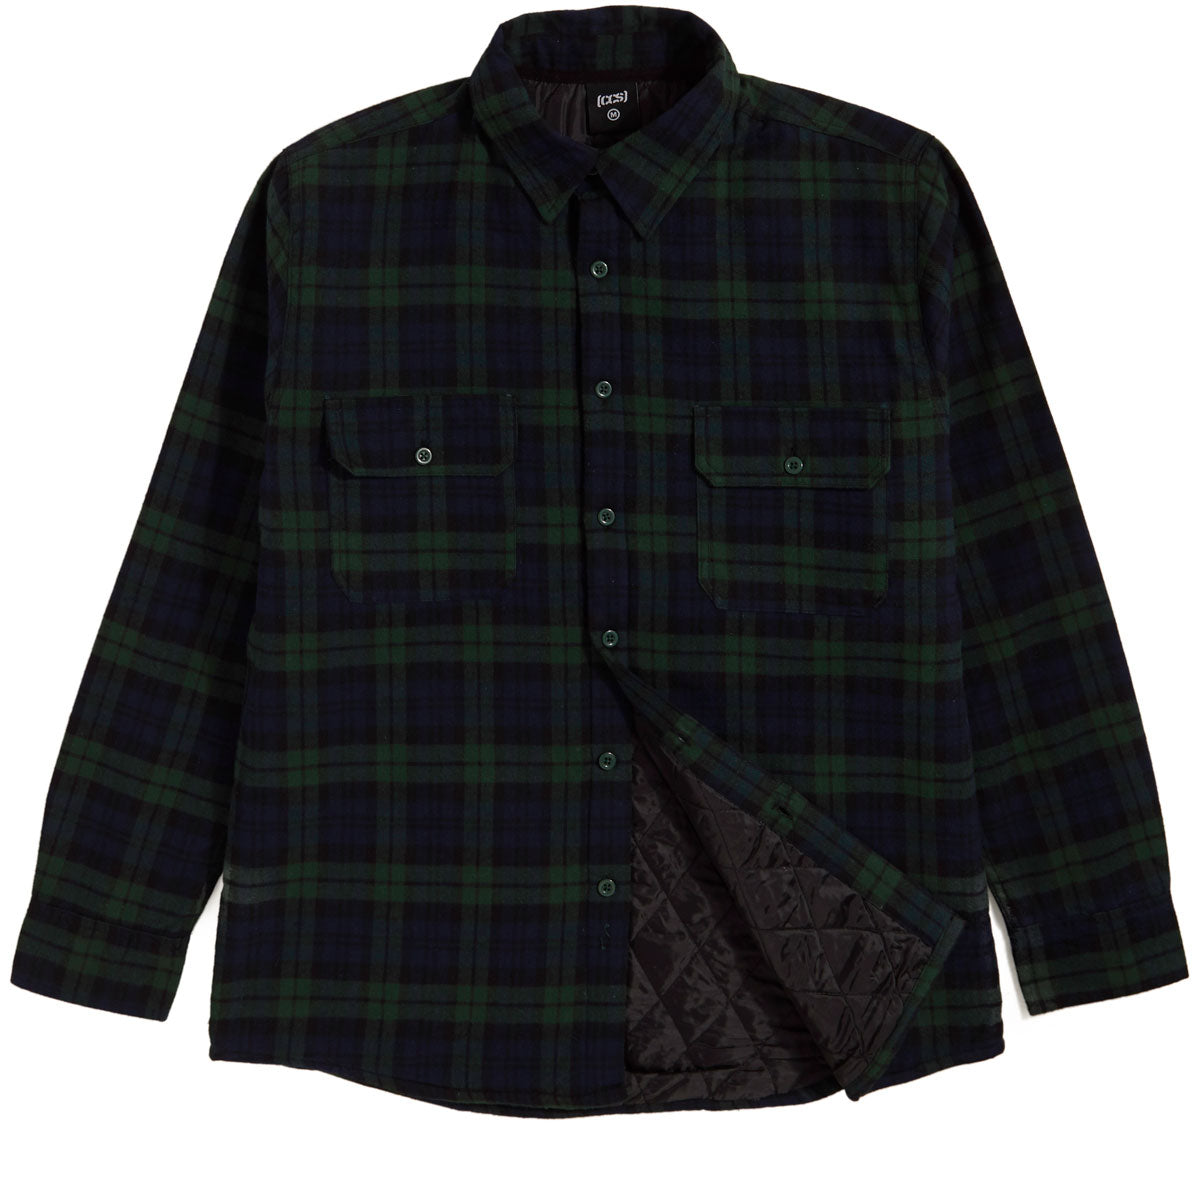 CCS Cheap Skates Quilted Flannel Jacket - Green/Navy image 1